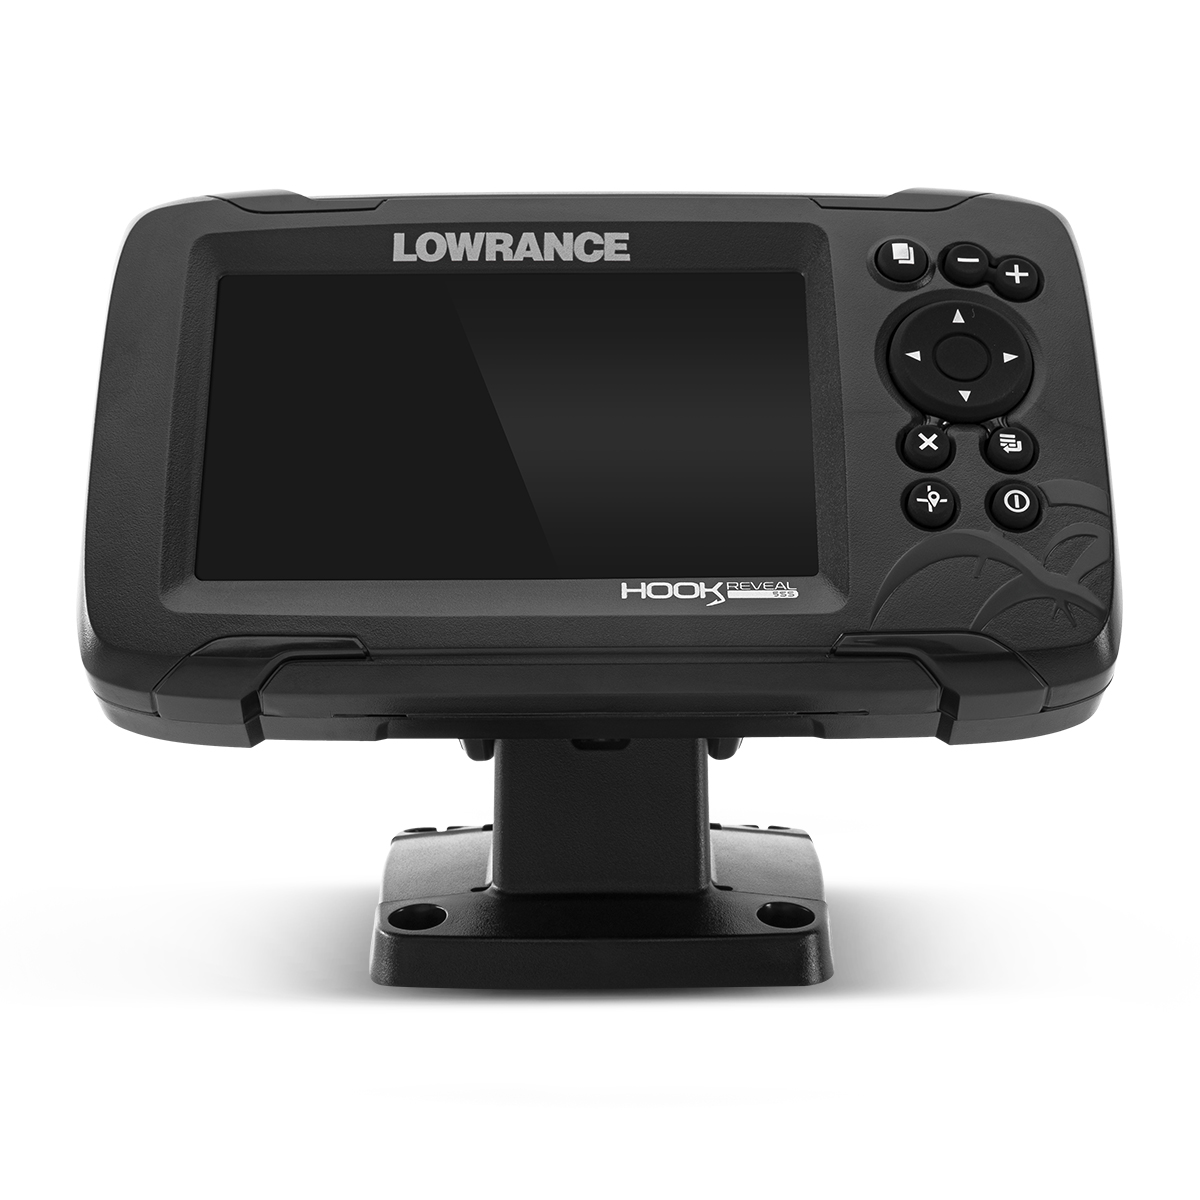 Lowrance Hook Reveal 5 Fish Finder Combo with Splitshot Transducer @ Club BCF